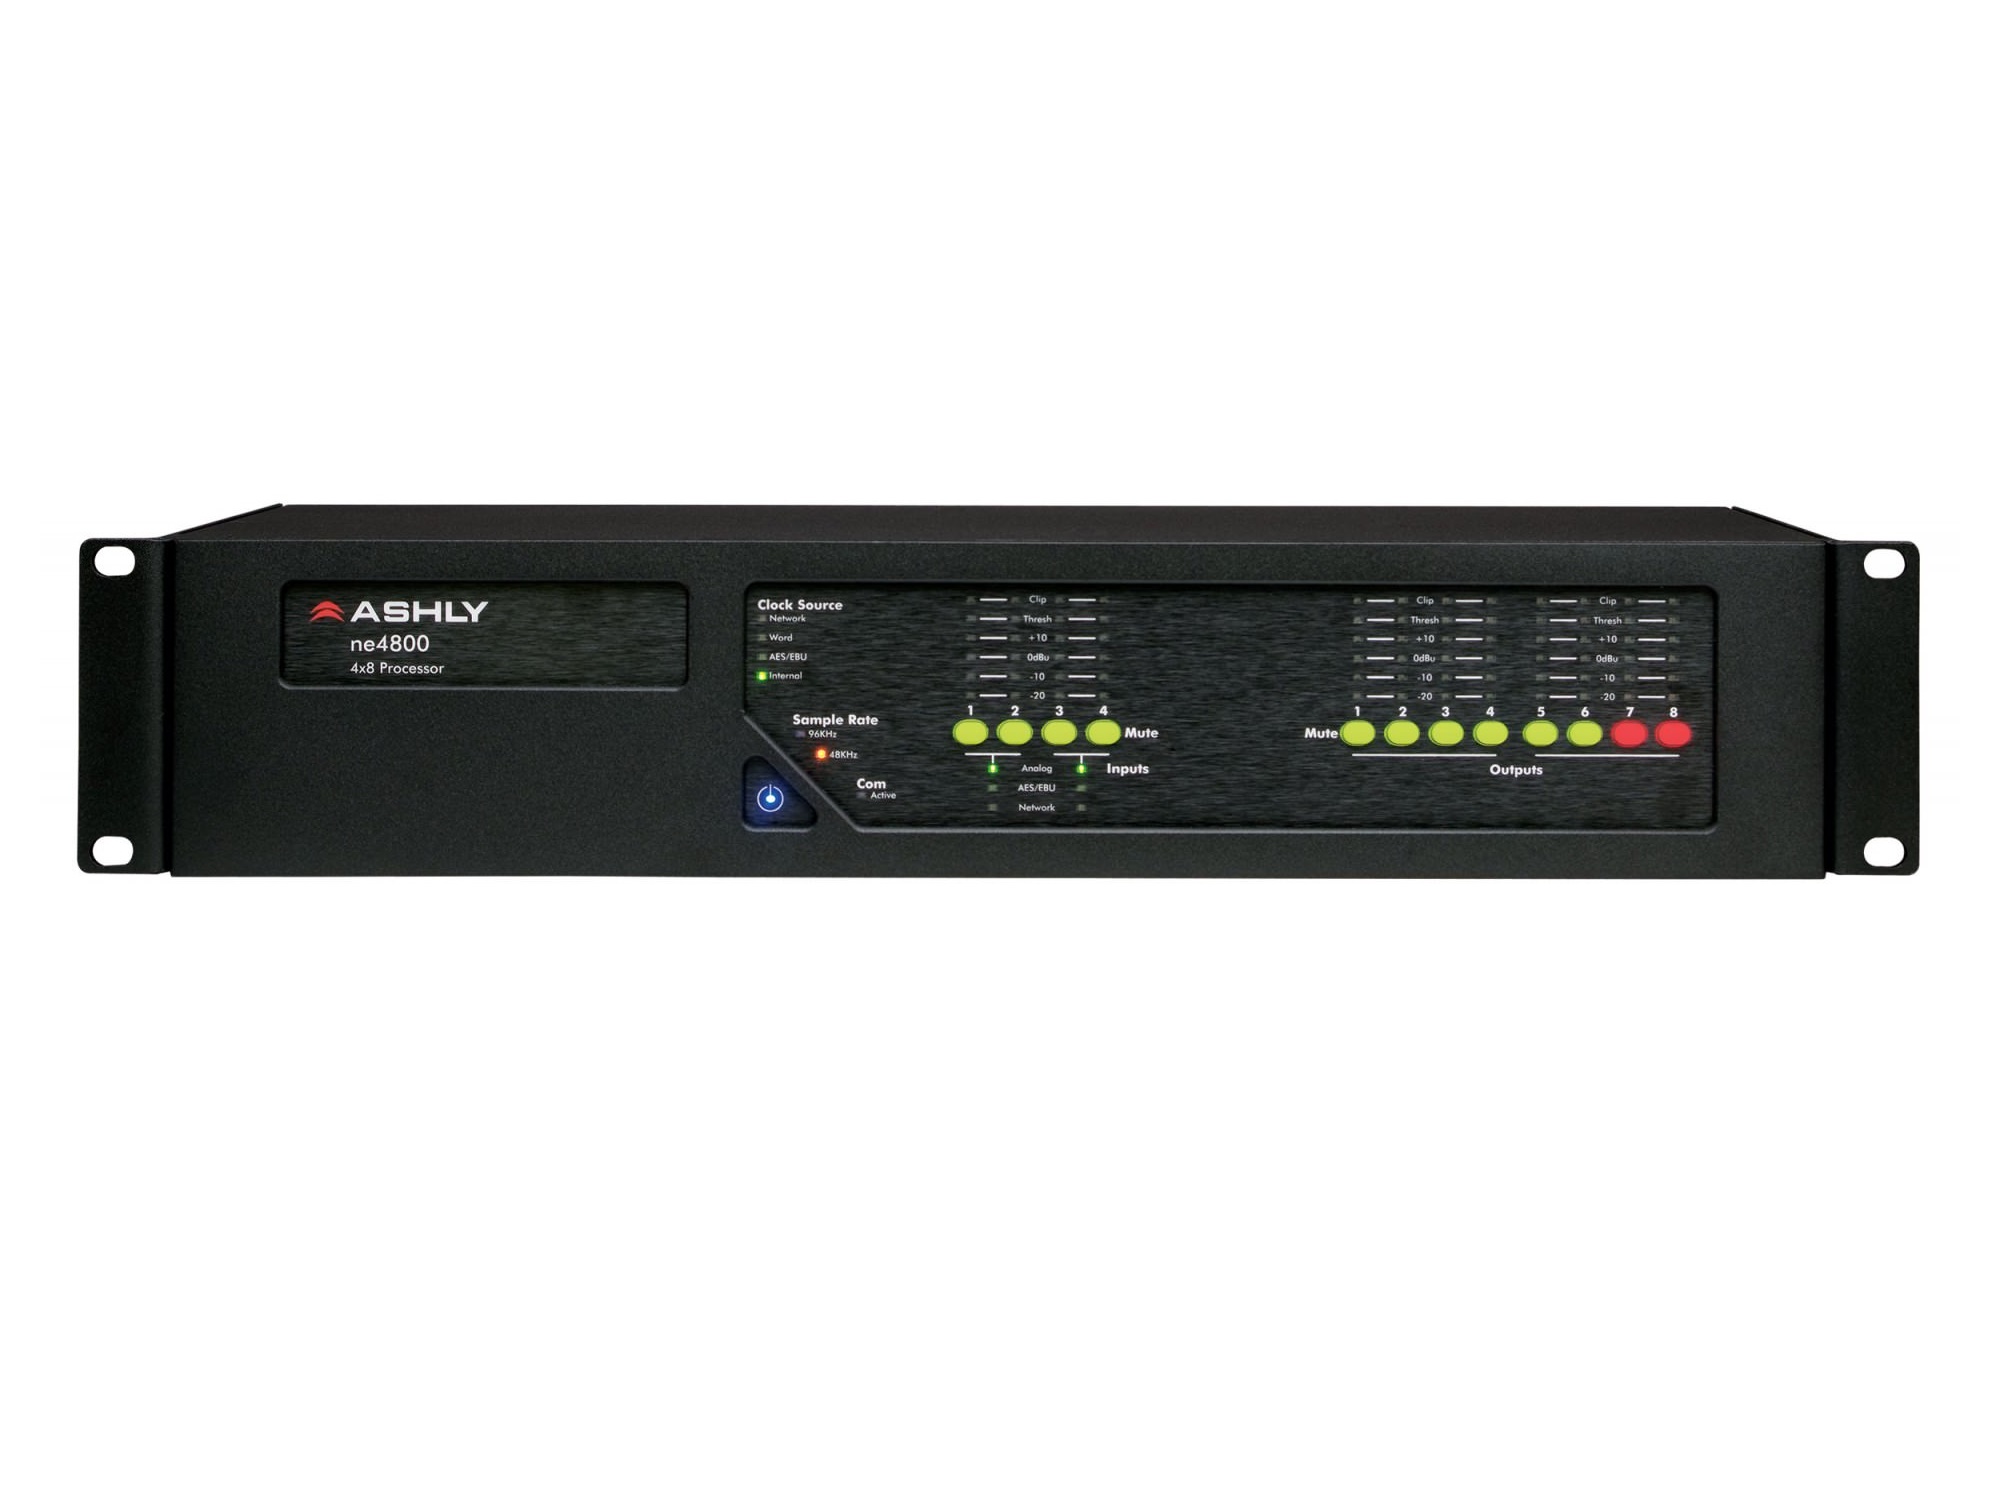 ne4800asd ne4800 Network Processor plus 4-Chan AES3 Inputs and 8-Chan AES3 Outputs/Dante Network Card by Ashly